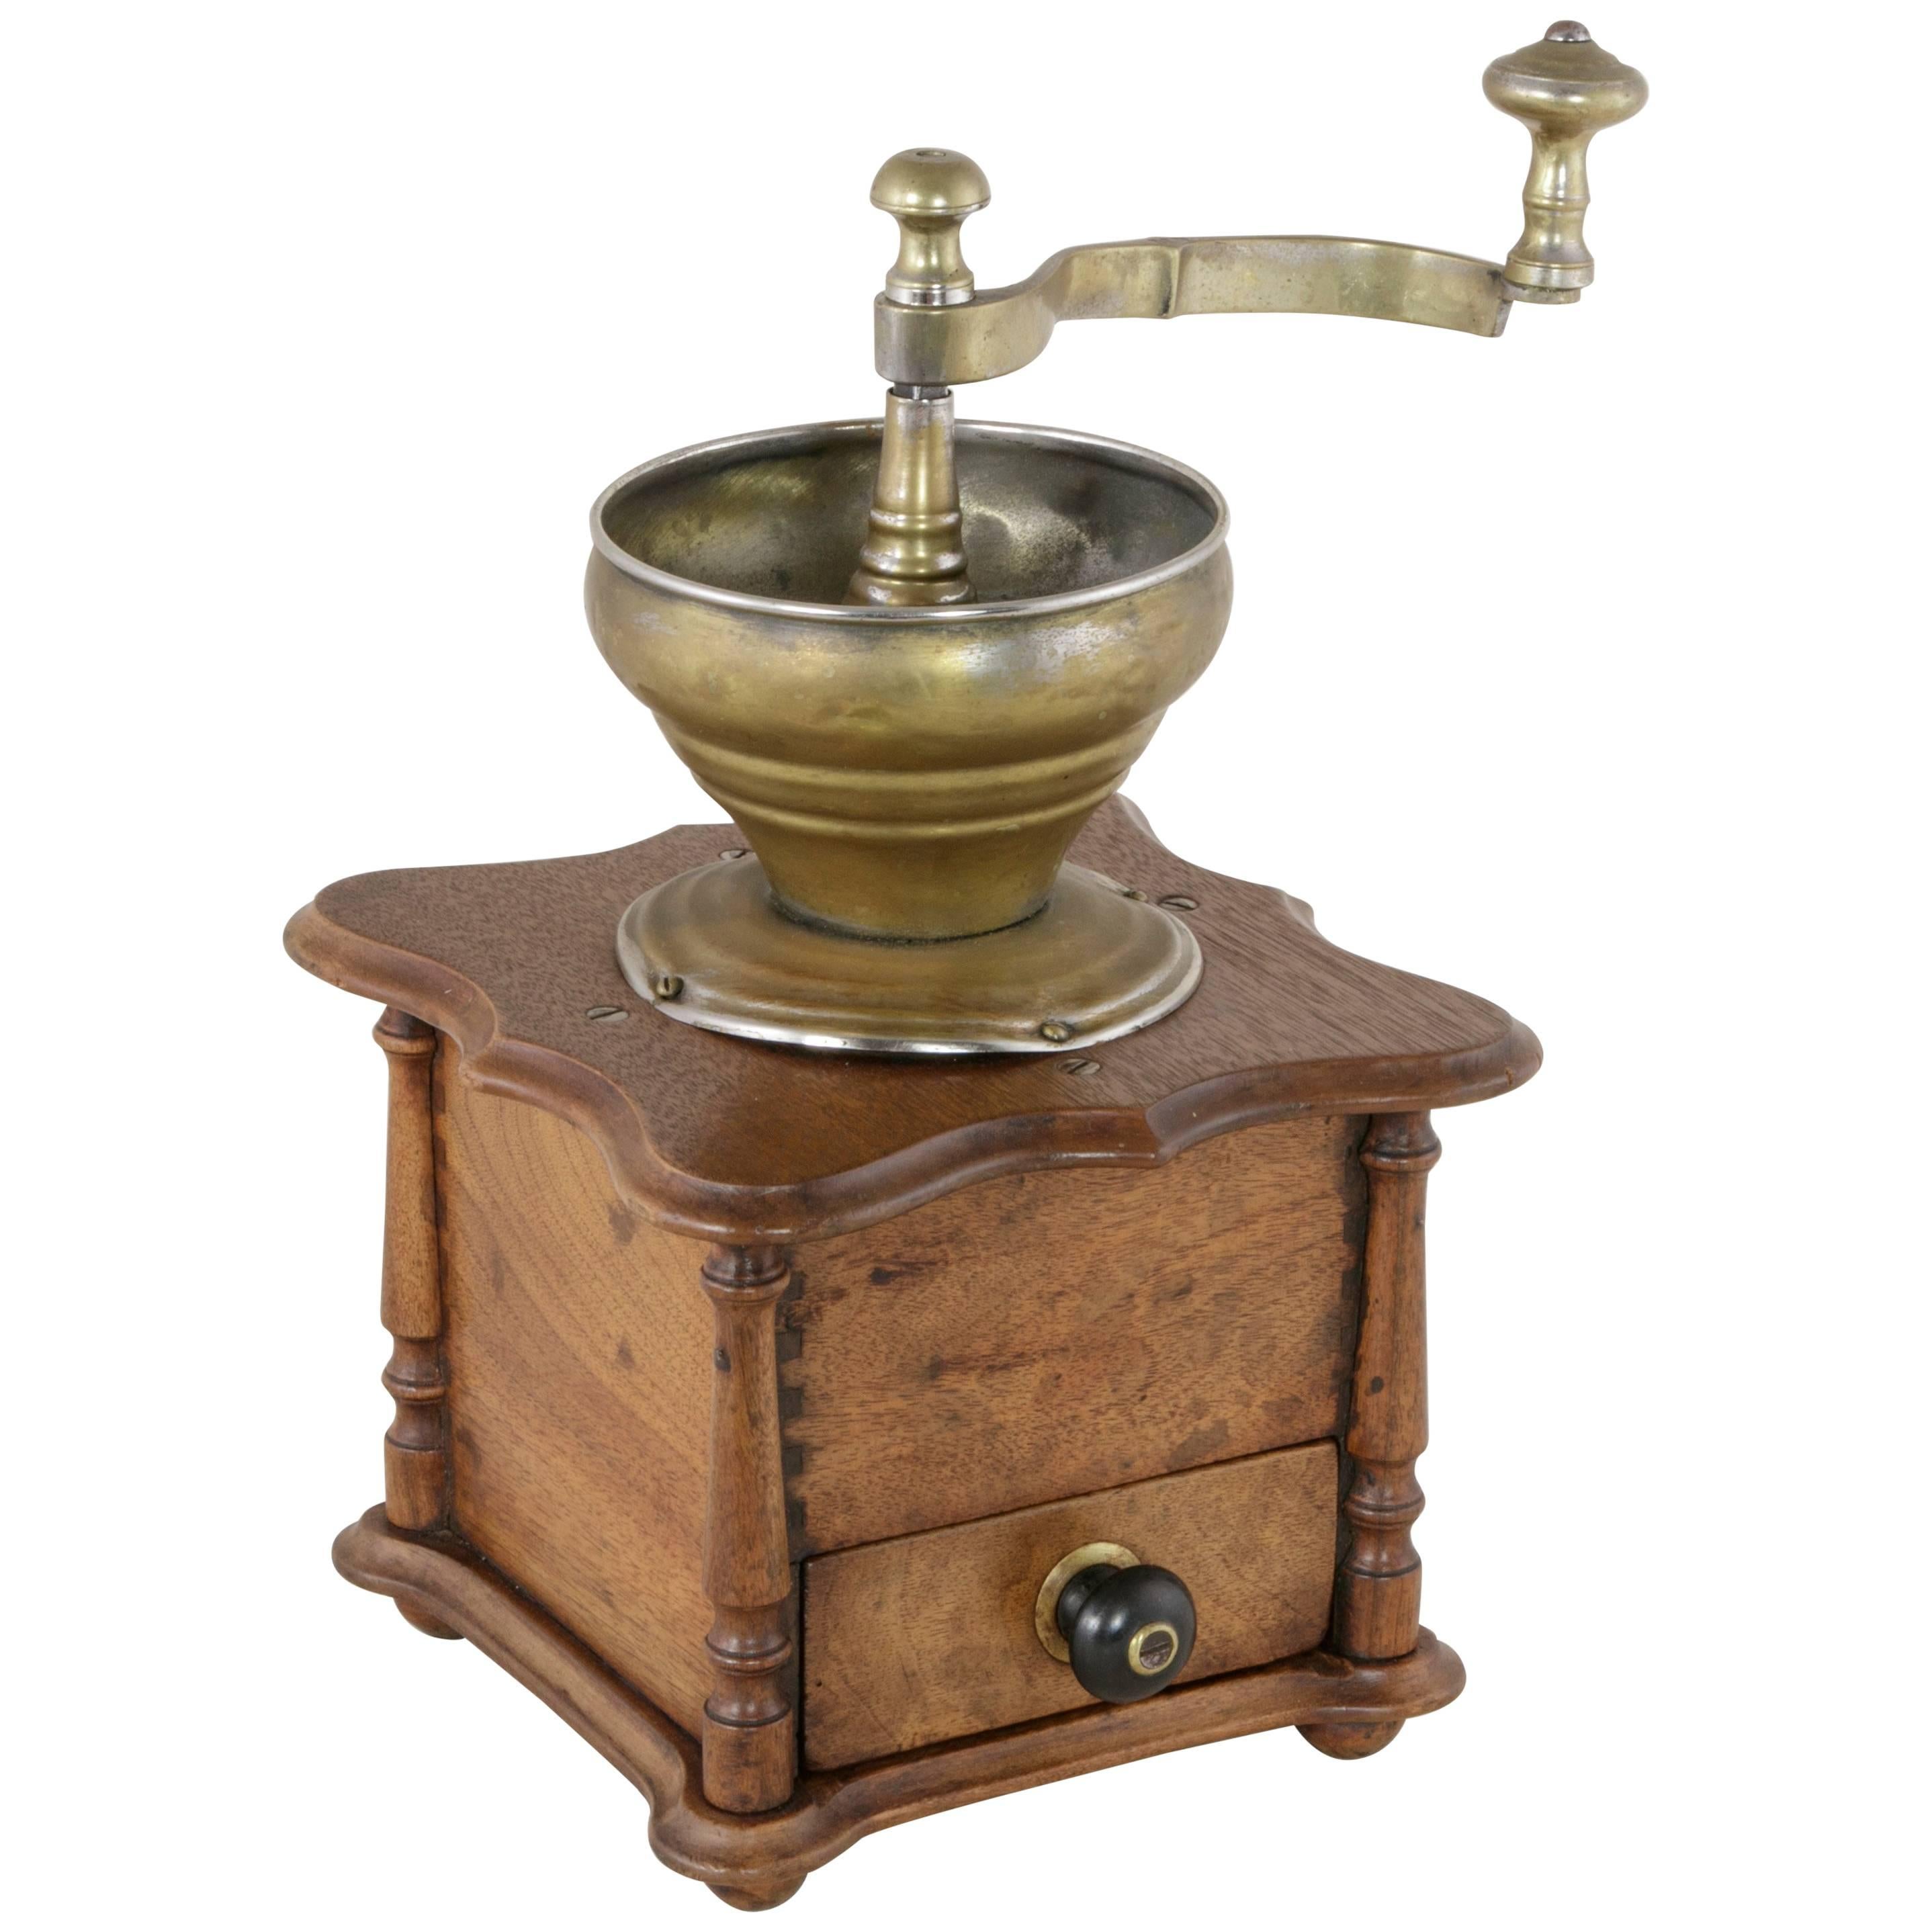 Late 19th Century French Walnut Coffee Grinder with Brass Funnel and Mechanism